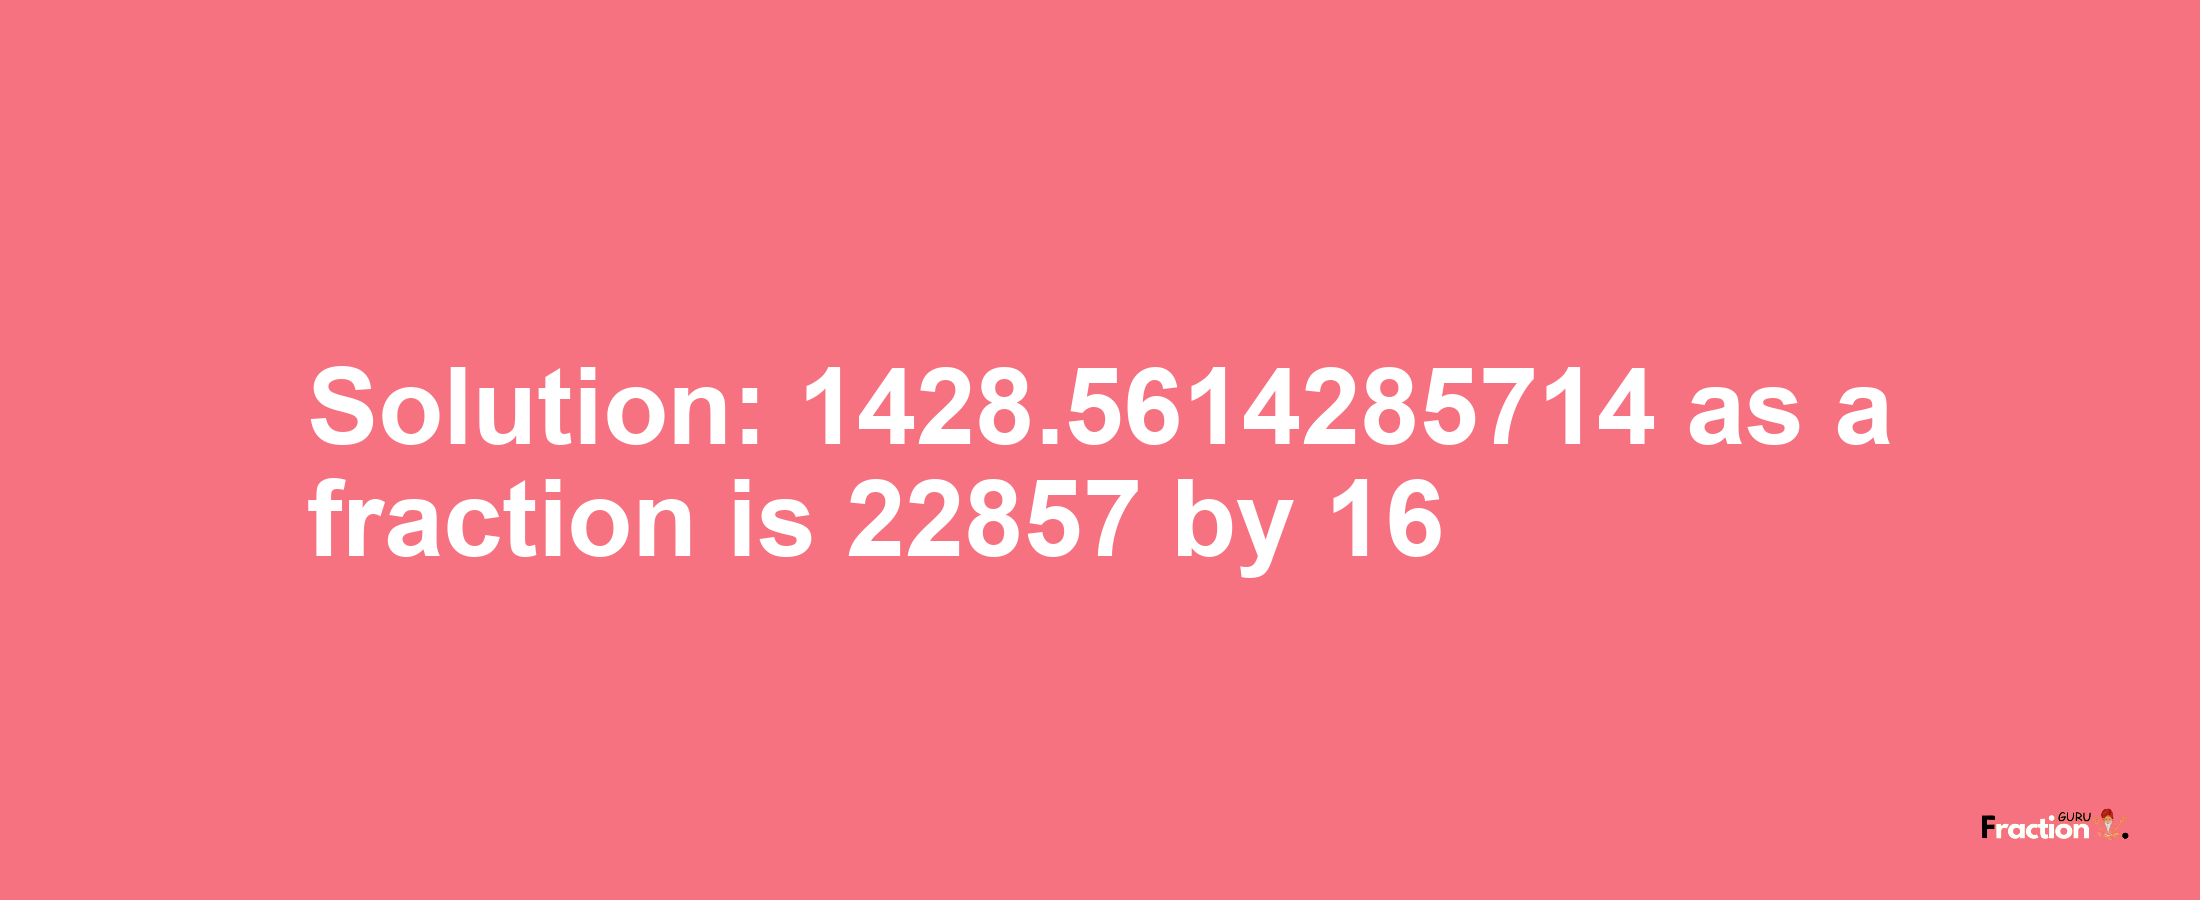 Solution:1428.5614285714 as a fraction is 22857/16